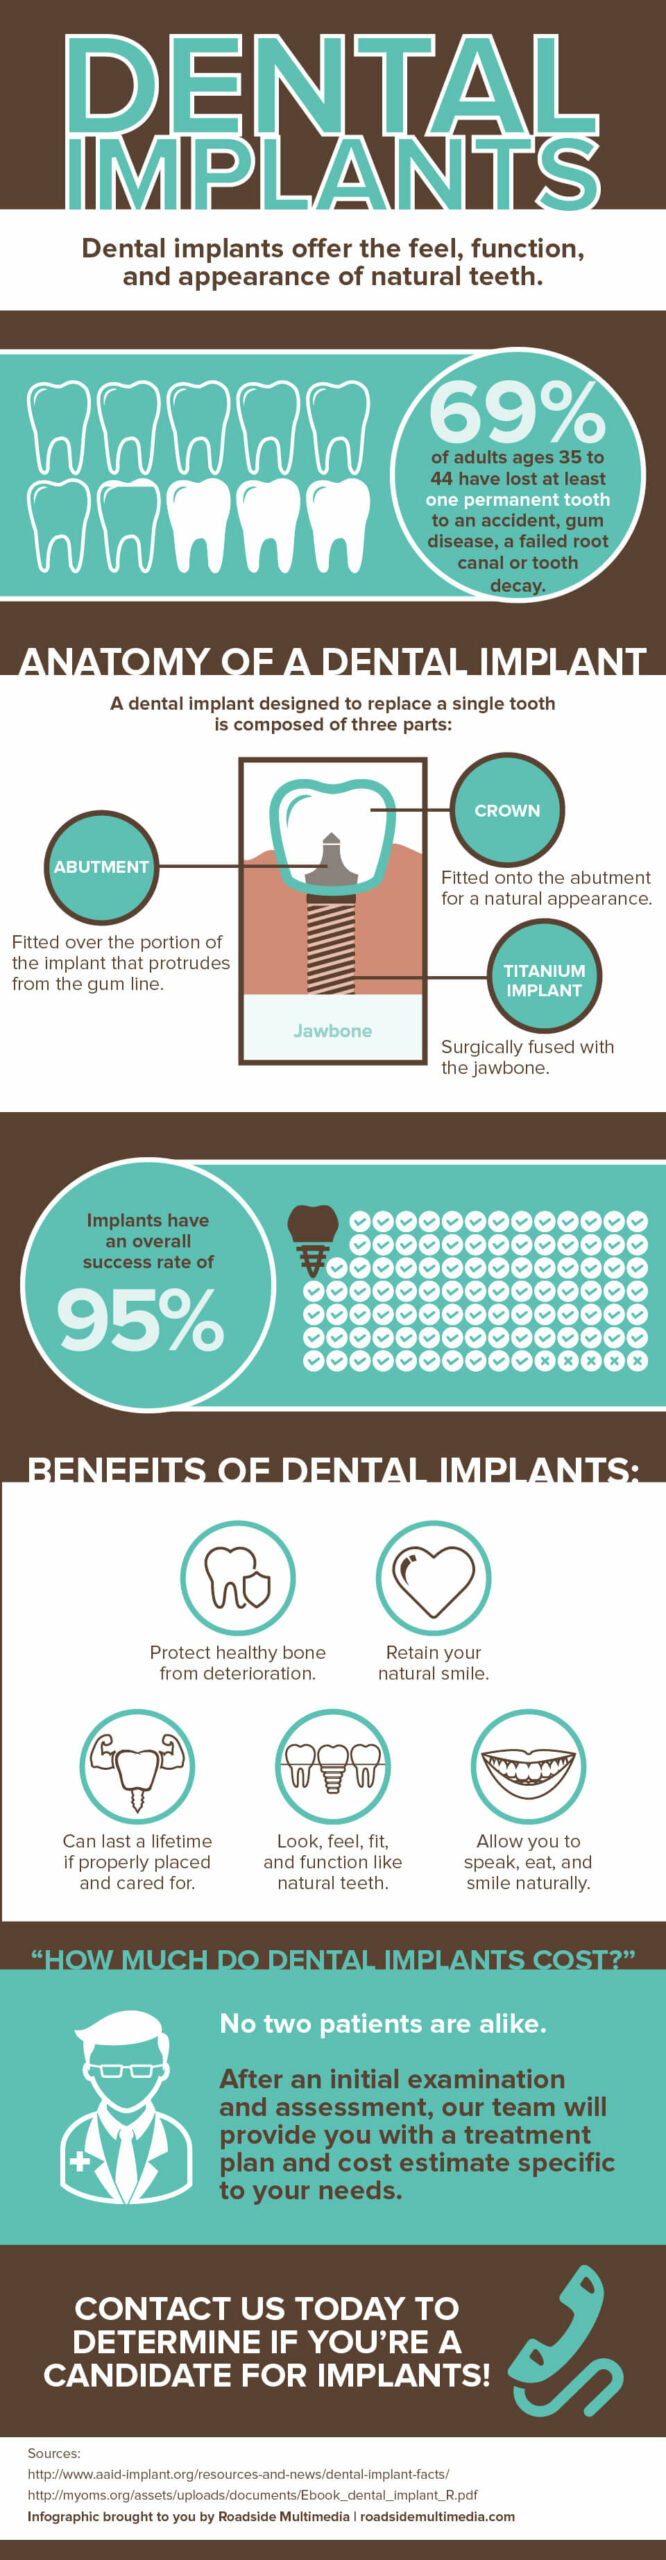 Dental Implants from your dentist in Ballard might be the right solution for you!